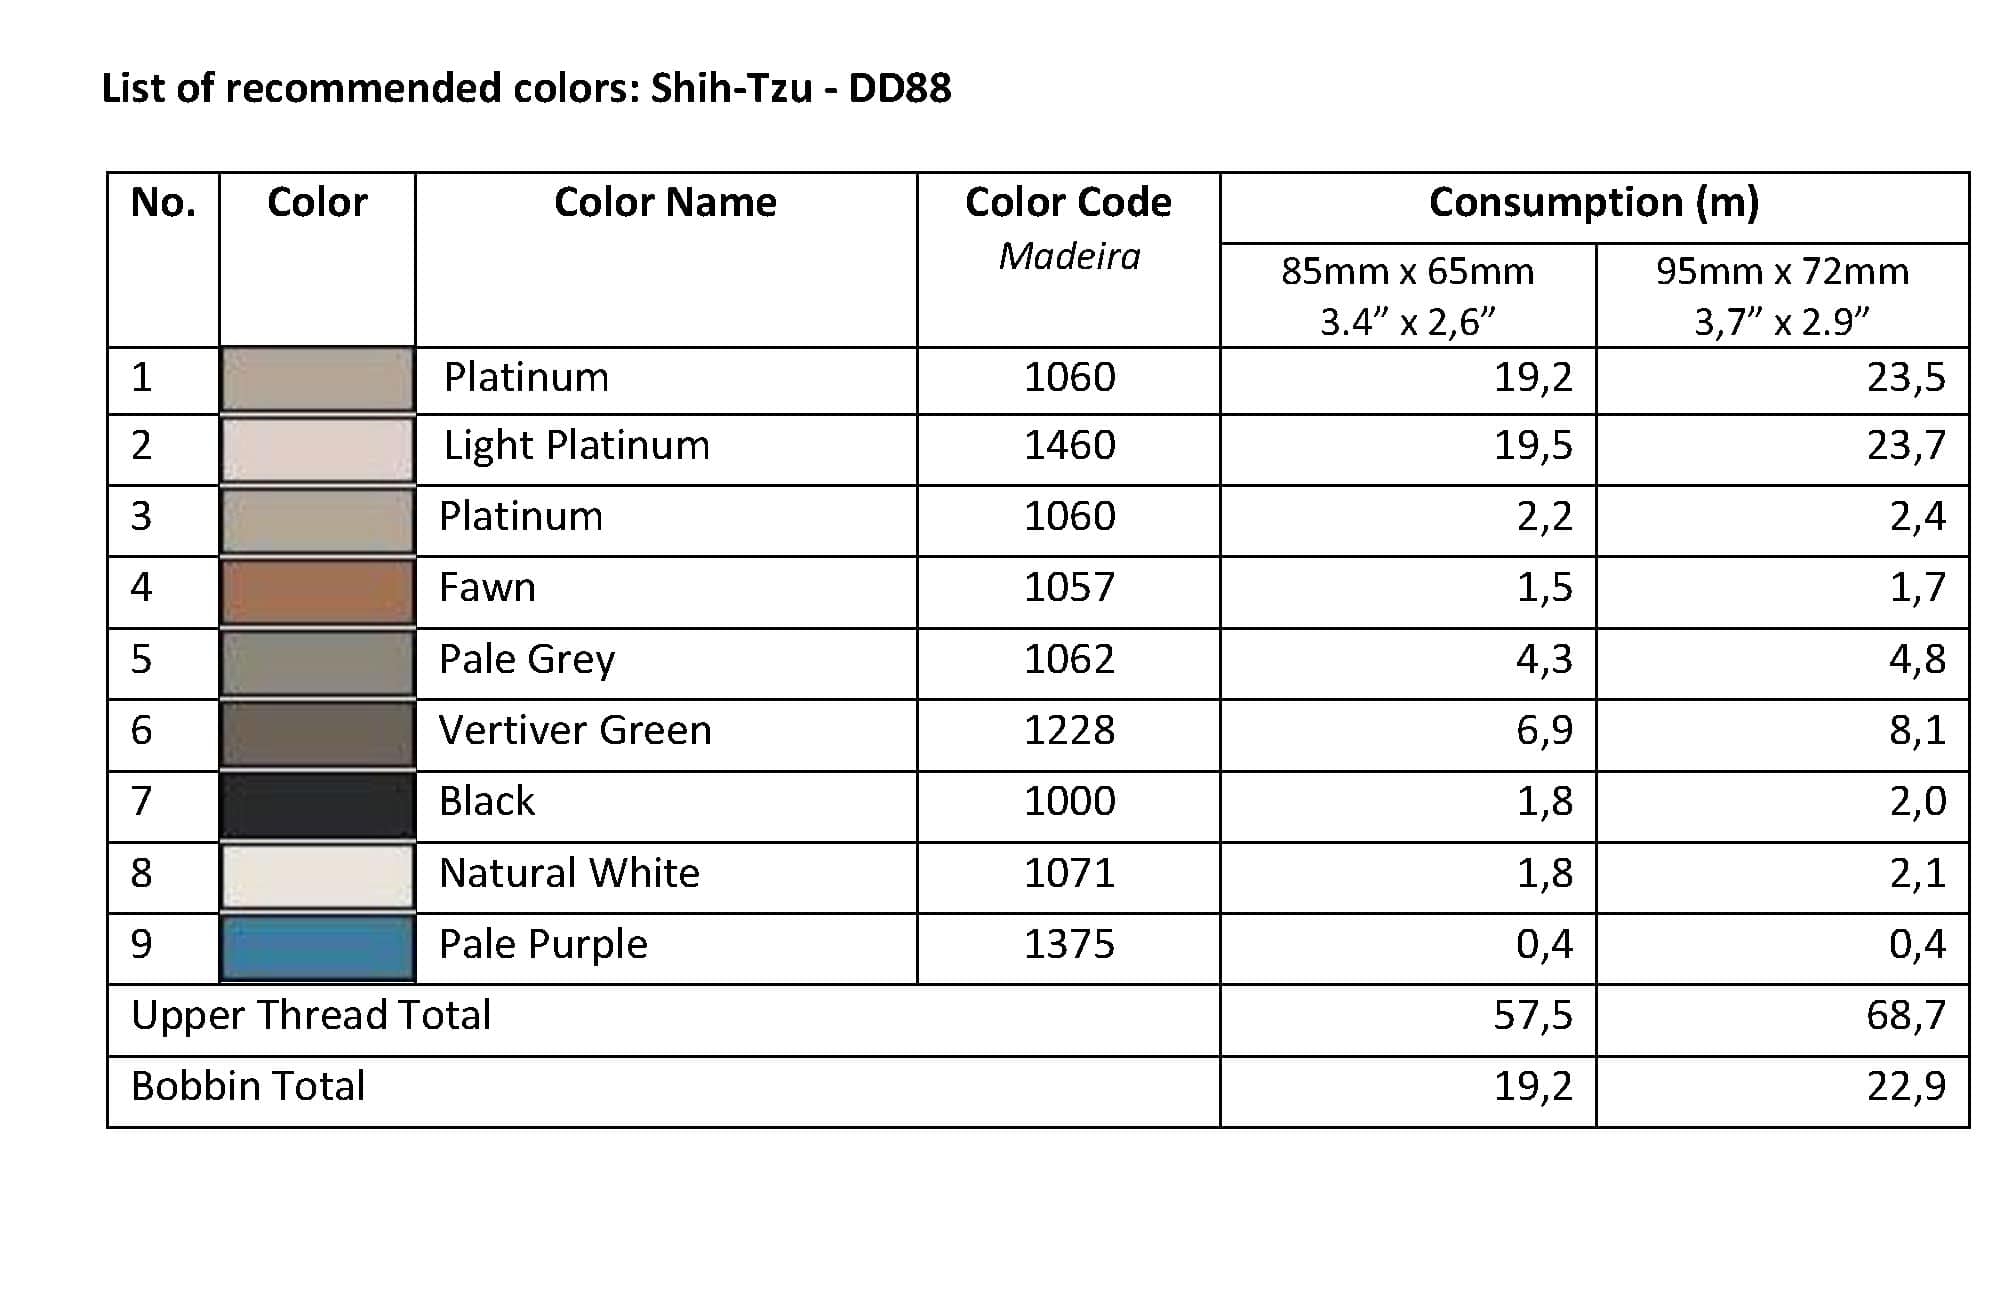 List of Recommended Colors -  Shih - Tzu DD88